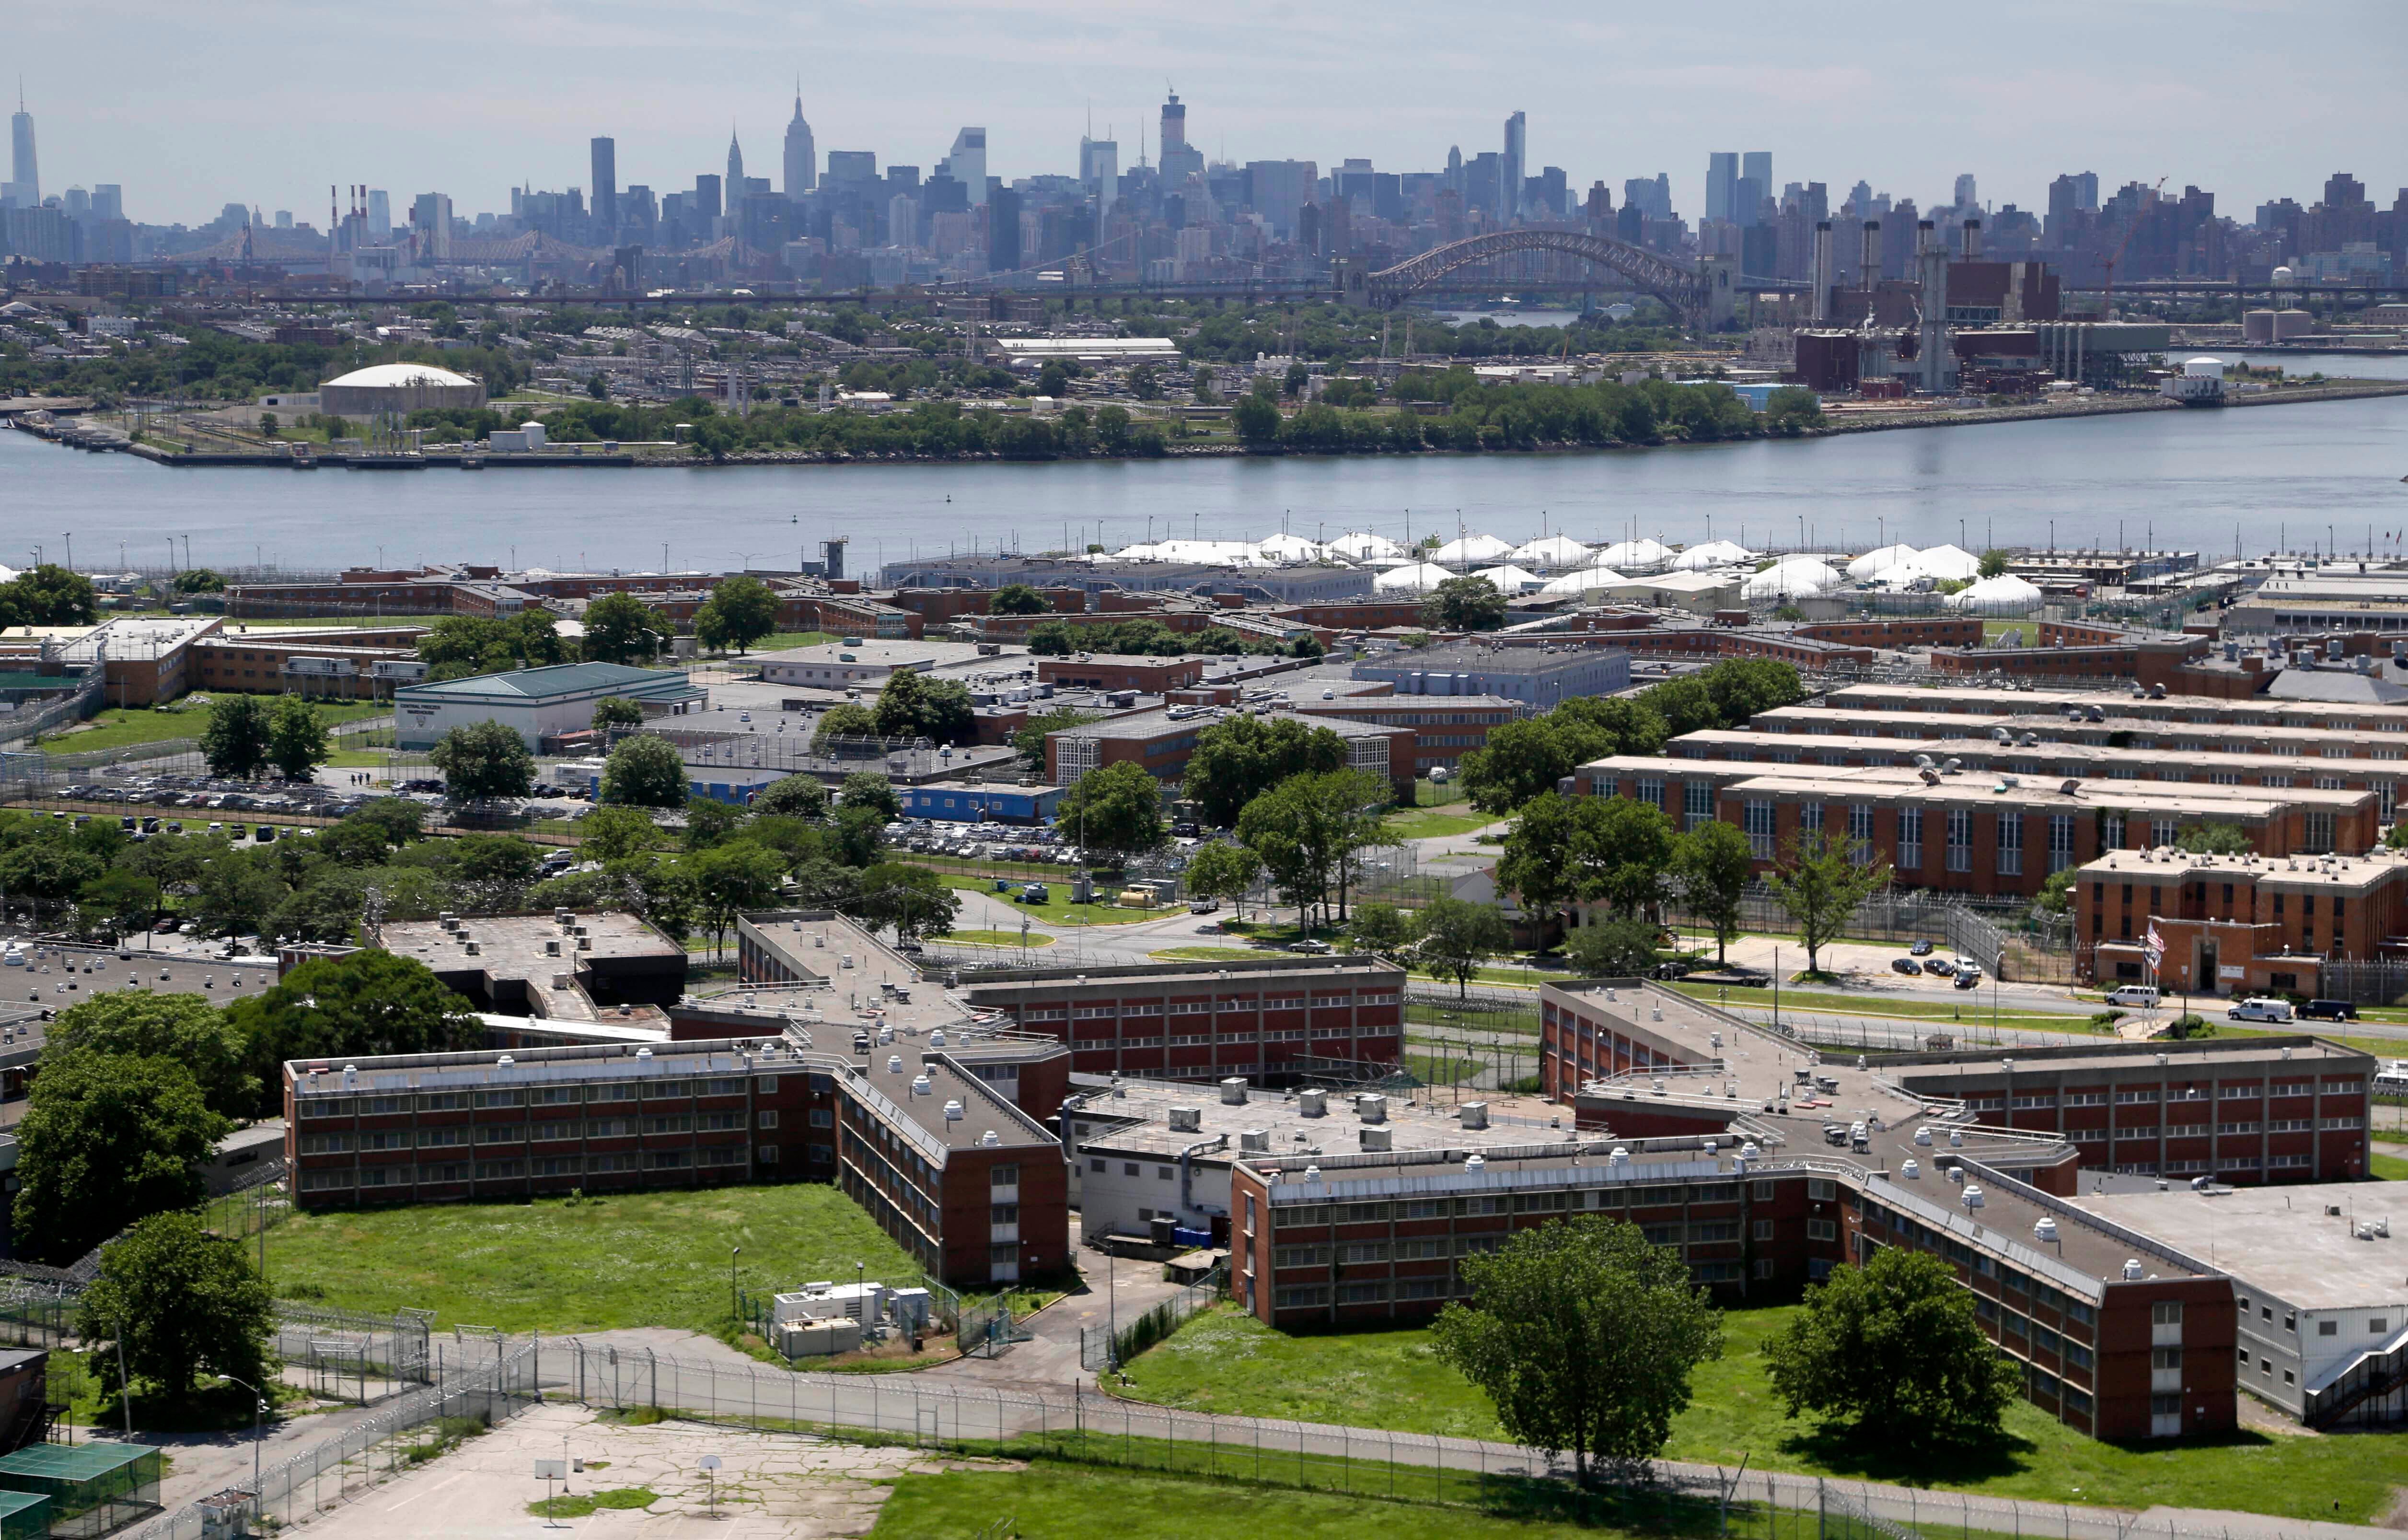 An aerial view of the notorious Rikers Island Prison